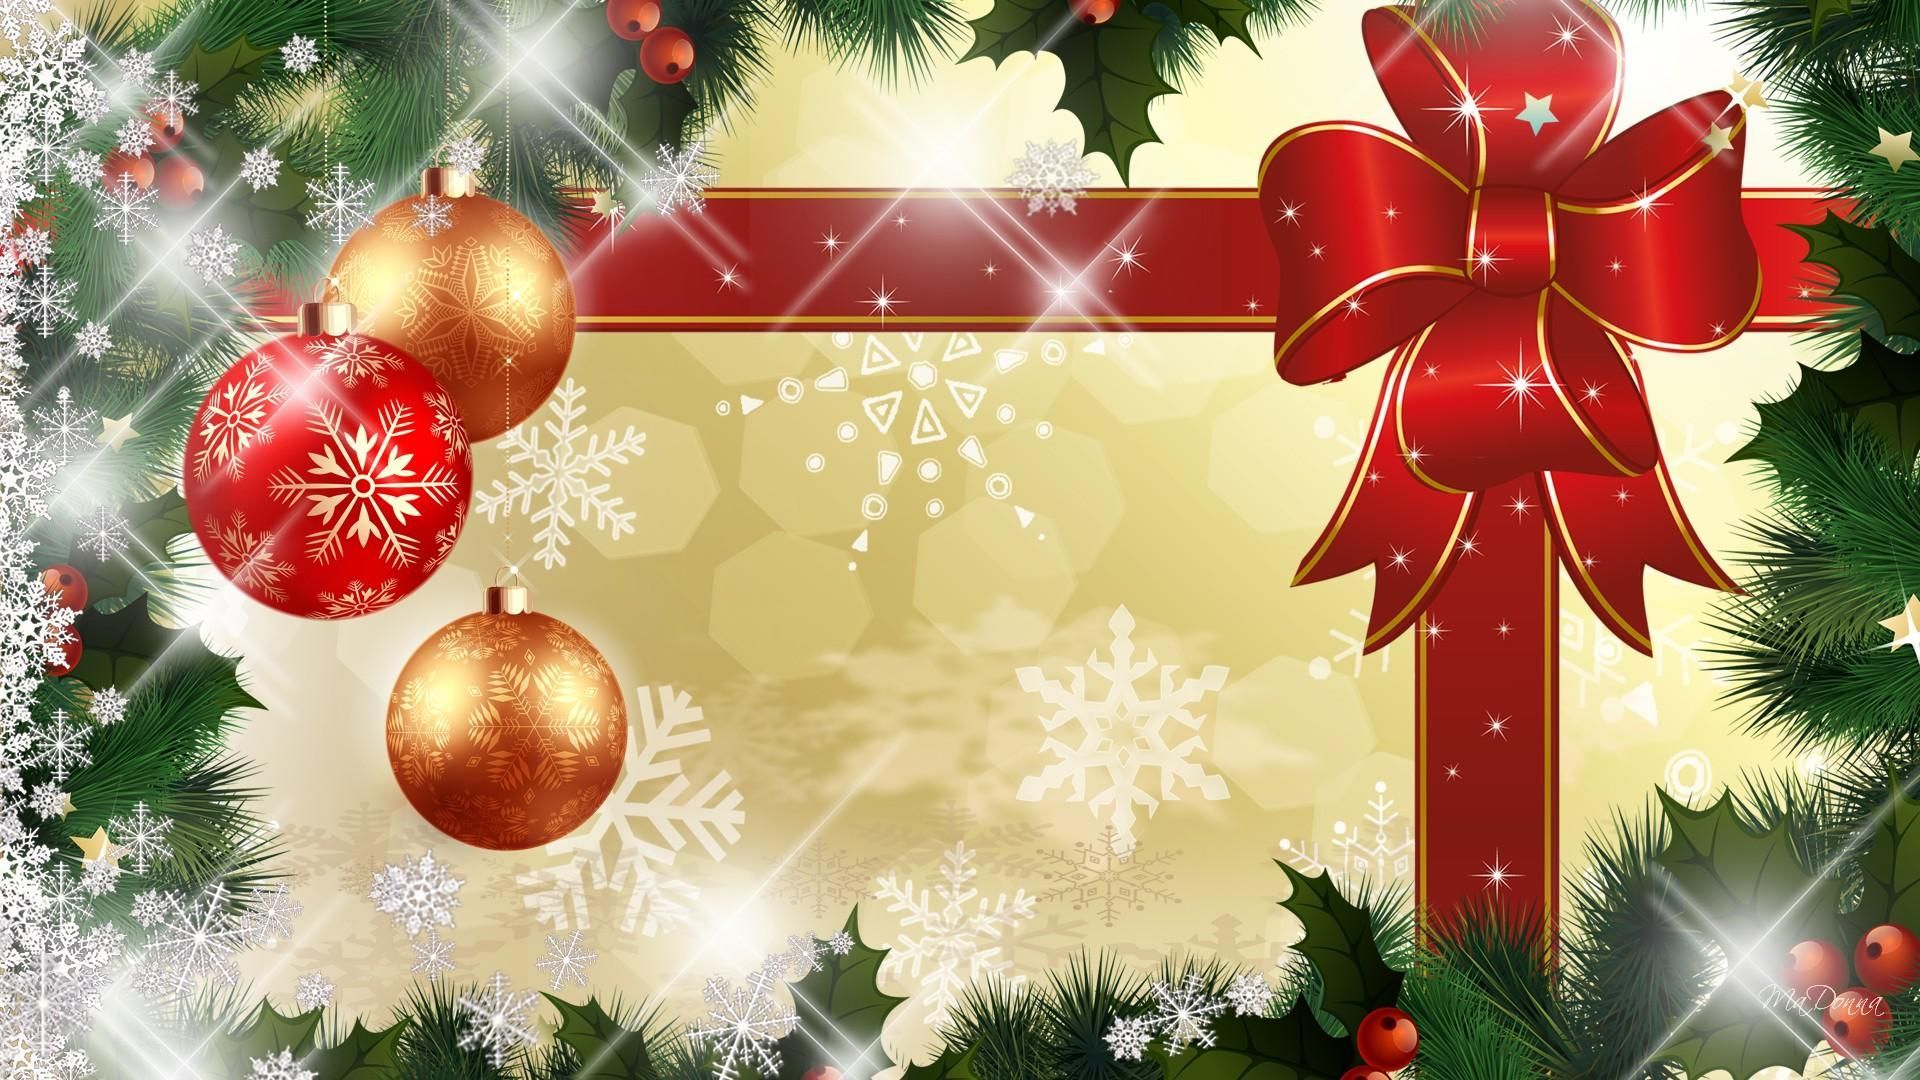 Merry Christmas Borders Wallpapers Wallpaper Cave